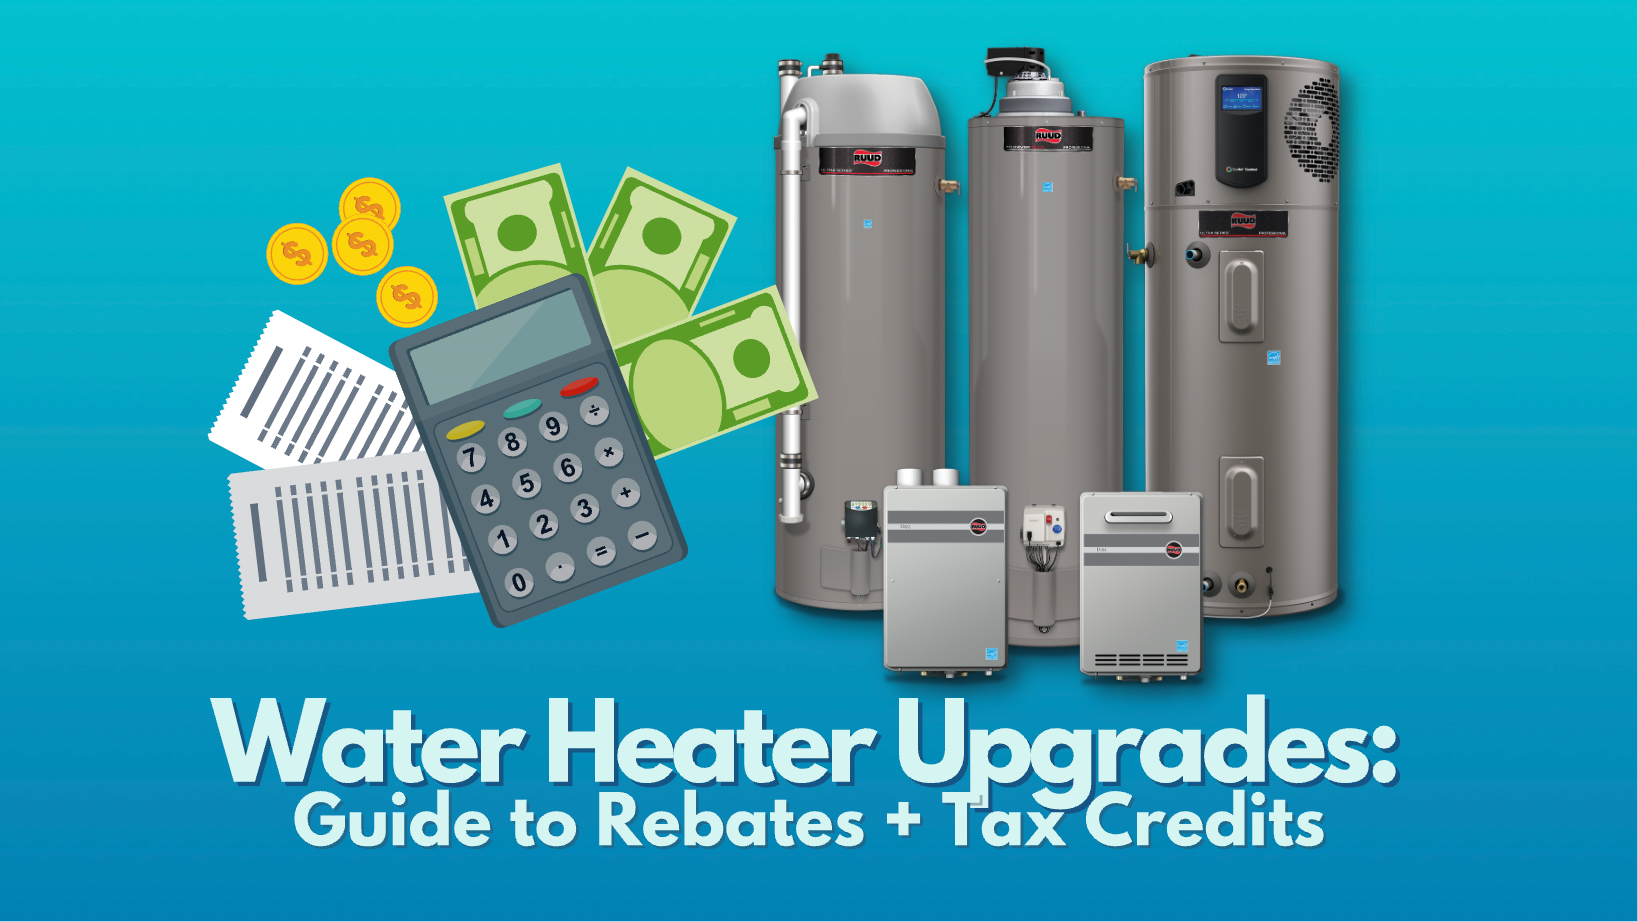 Water Heater Upgrades Guide to Rebates and Tax Credits